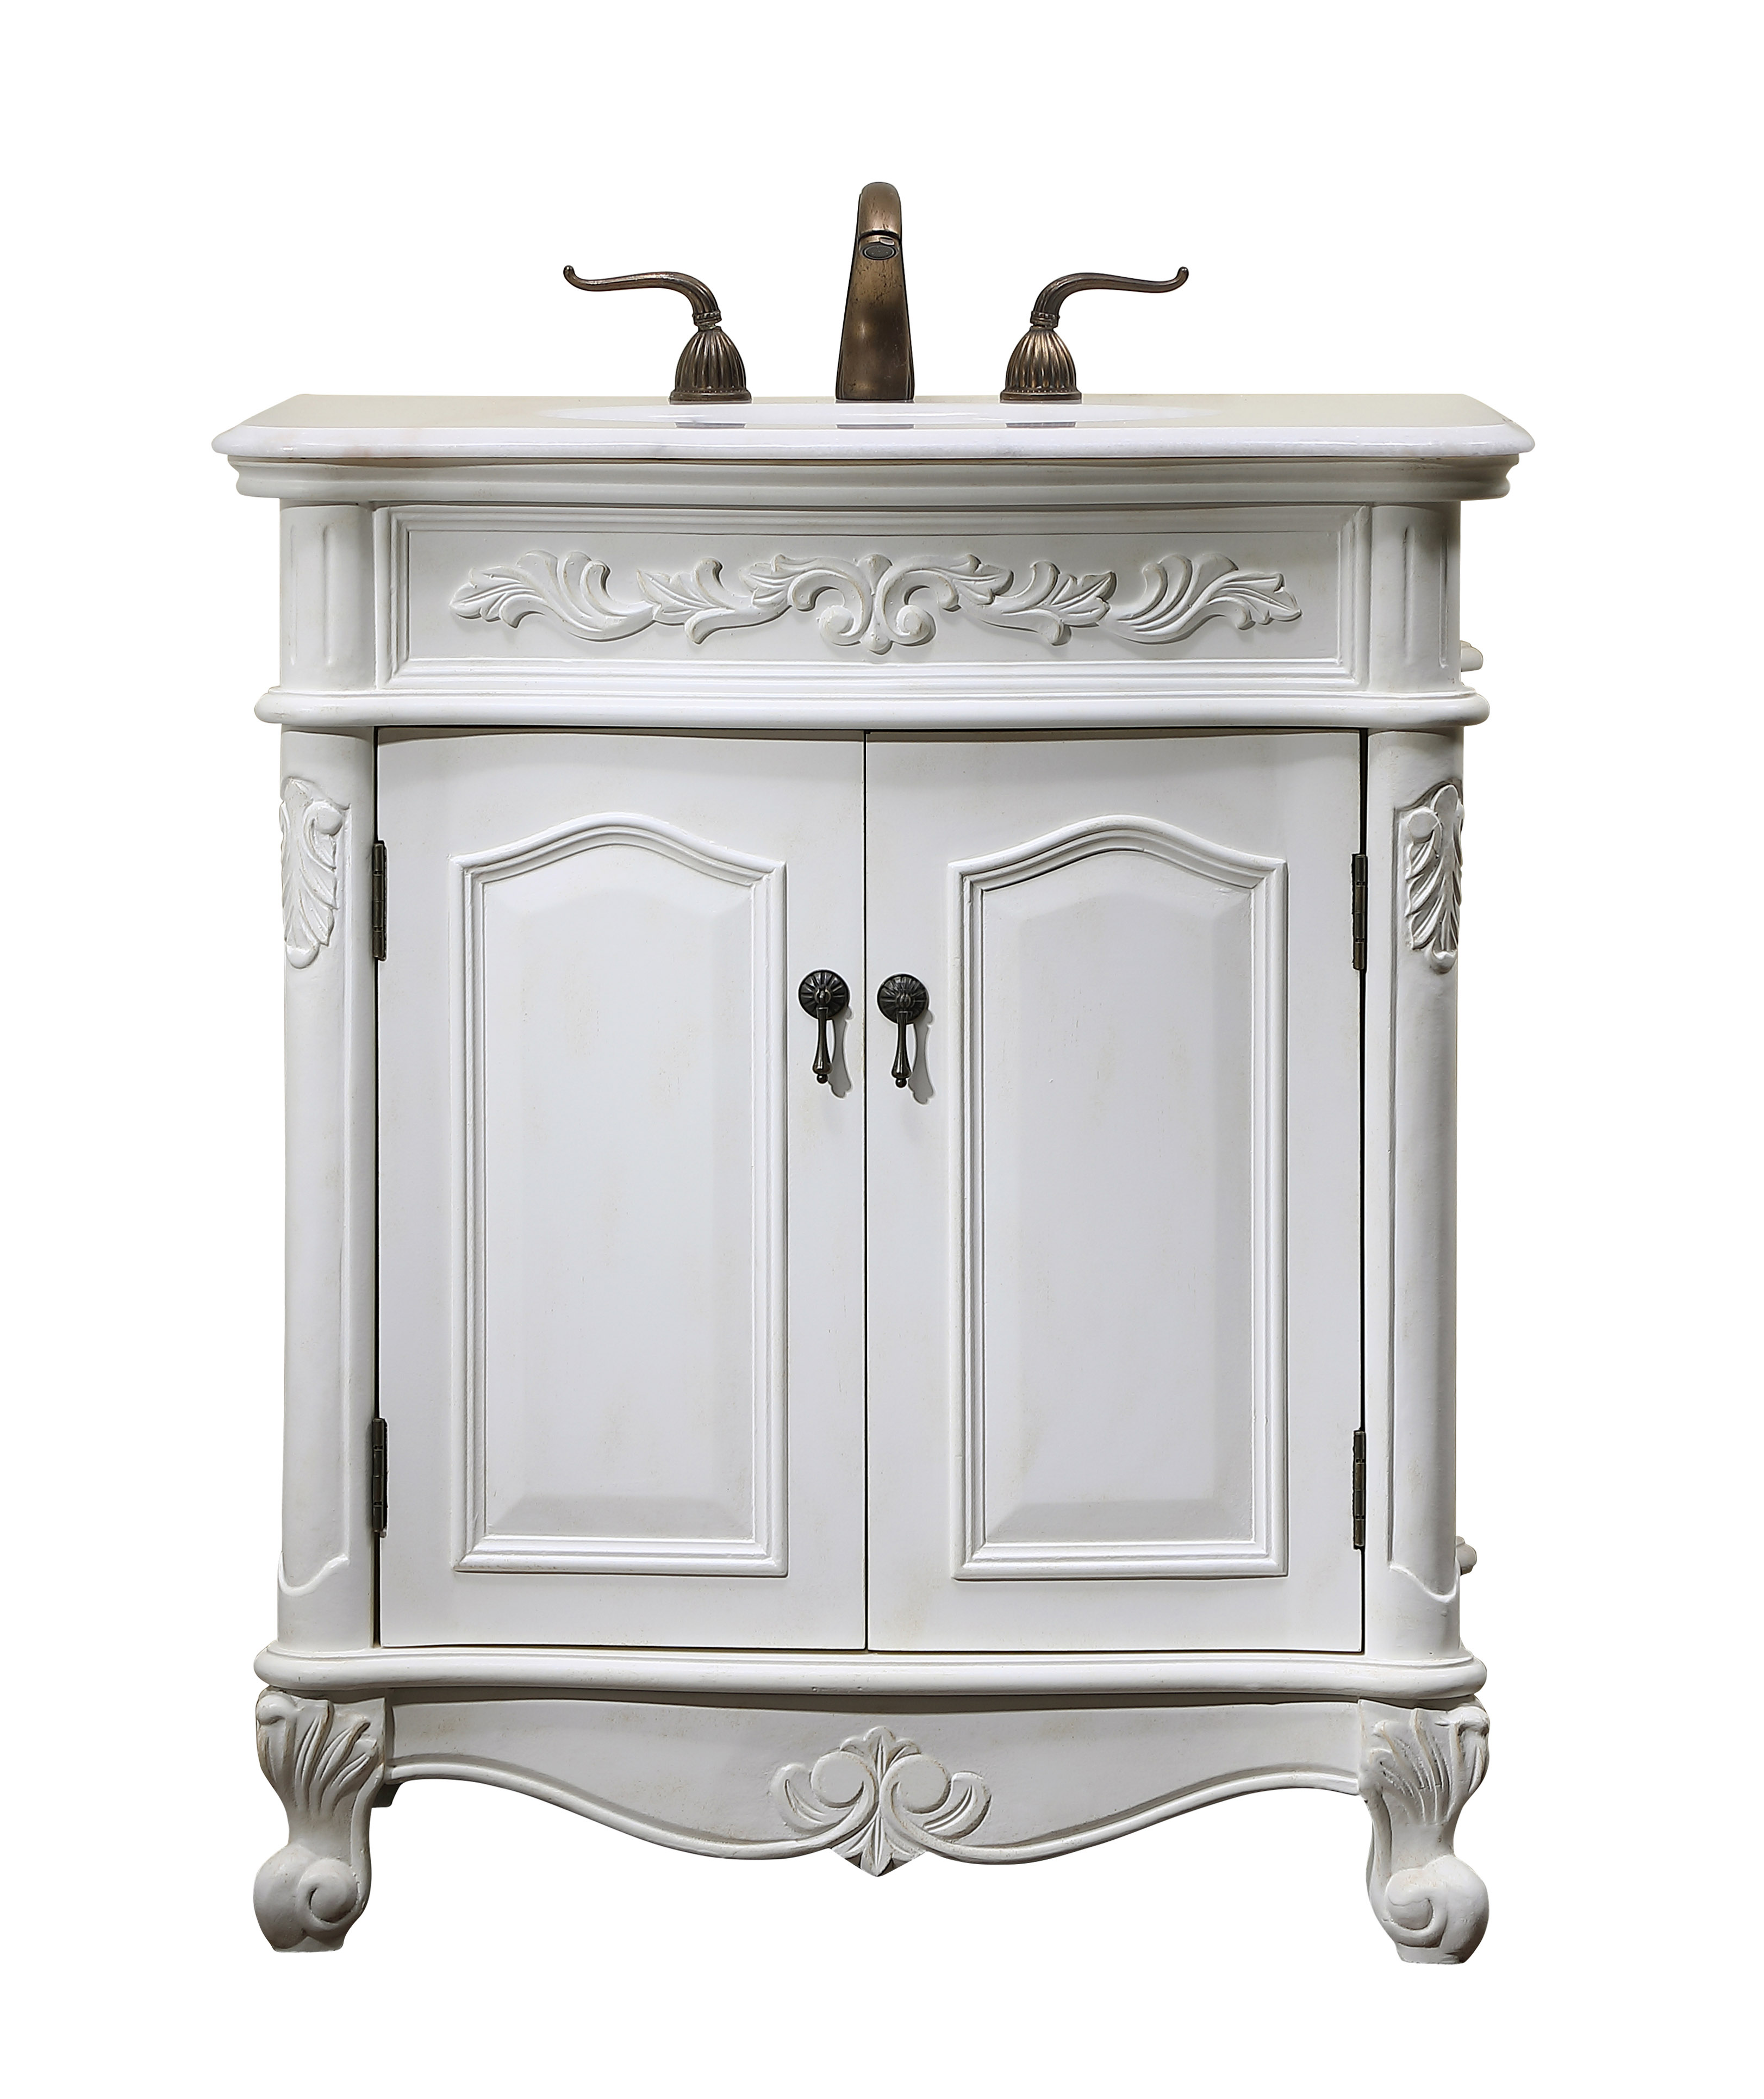 30" Antique White Finish Vanity with Victorian Style Leg